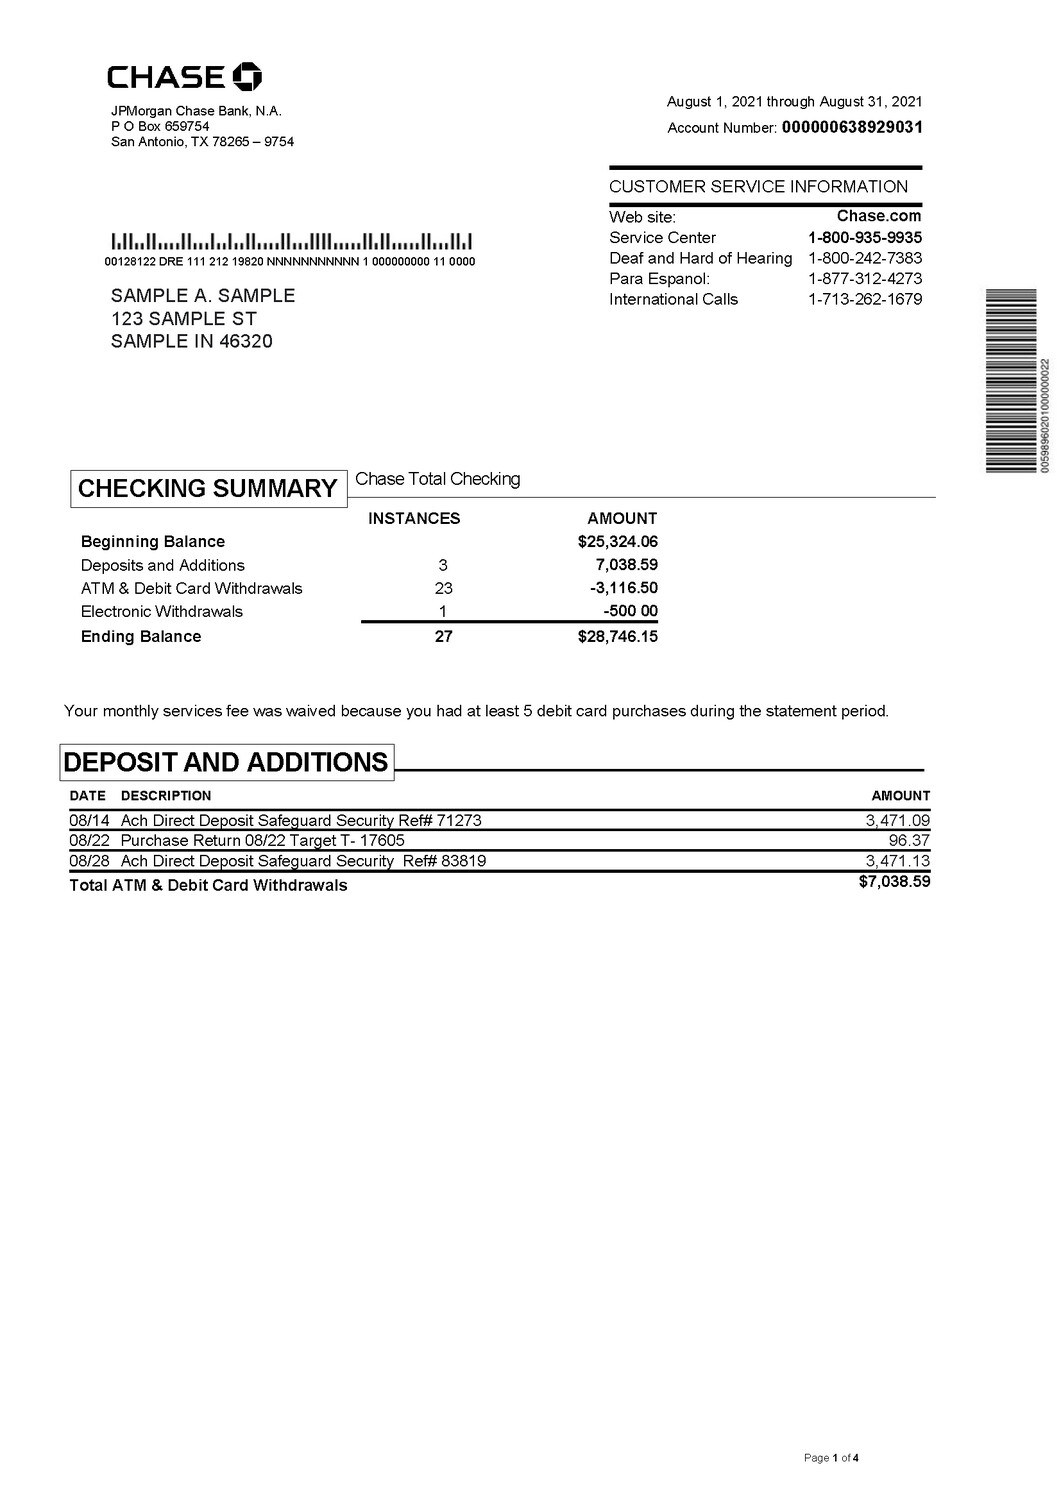 Income Documents Pack - 1- Chase bank Auto Calculate statement, 2 color pay stubs, 1 - W2, 1 - 1099, 2 - bills